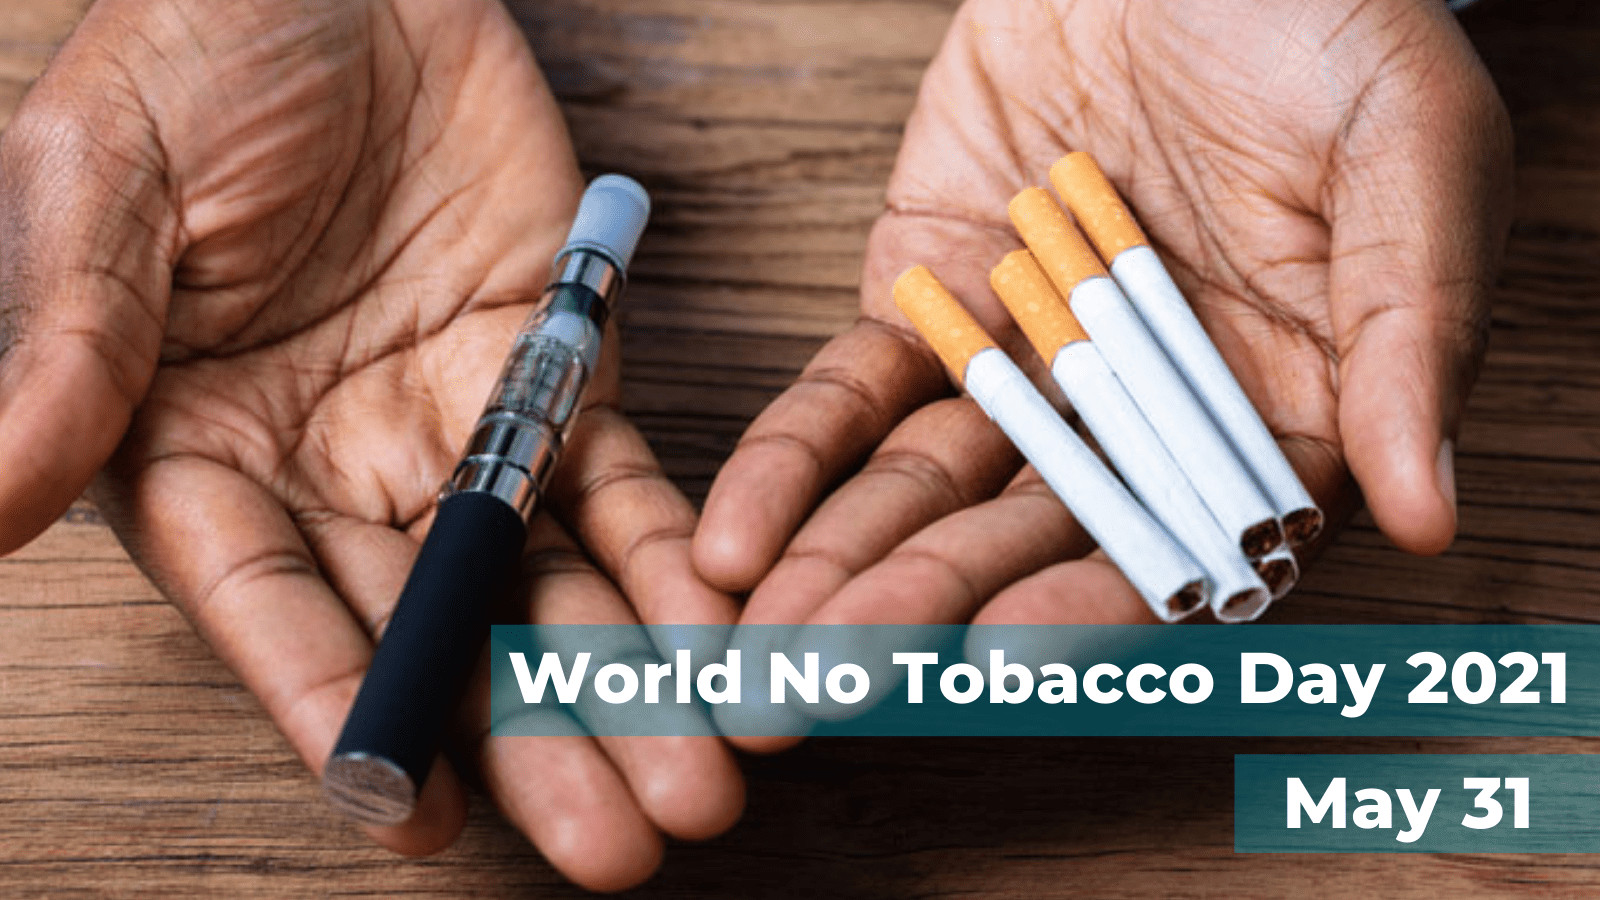 Commit to Quit for World No Tobacco Day 2021